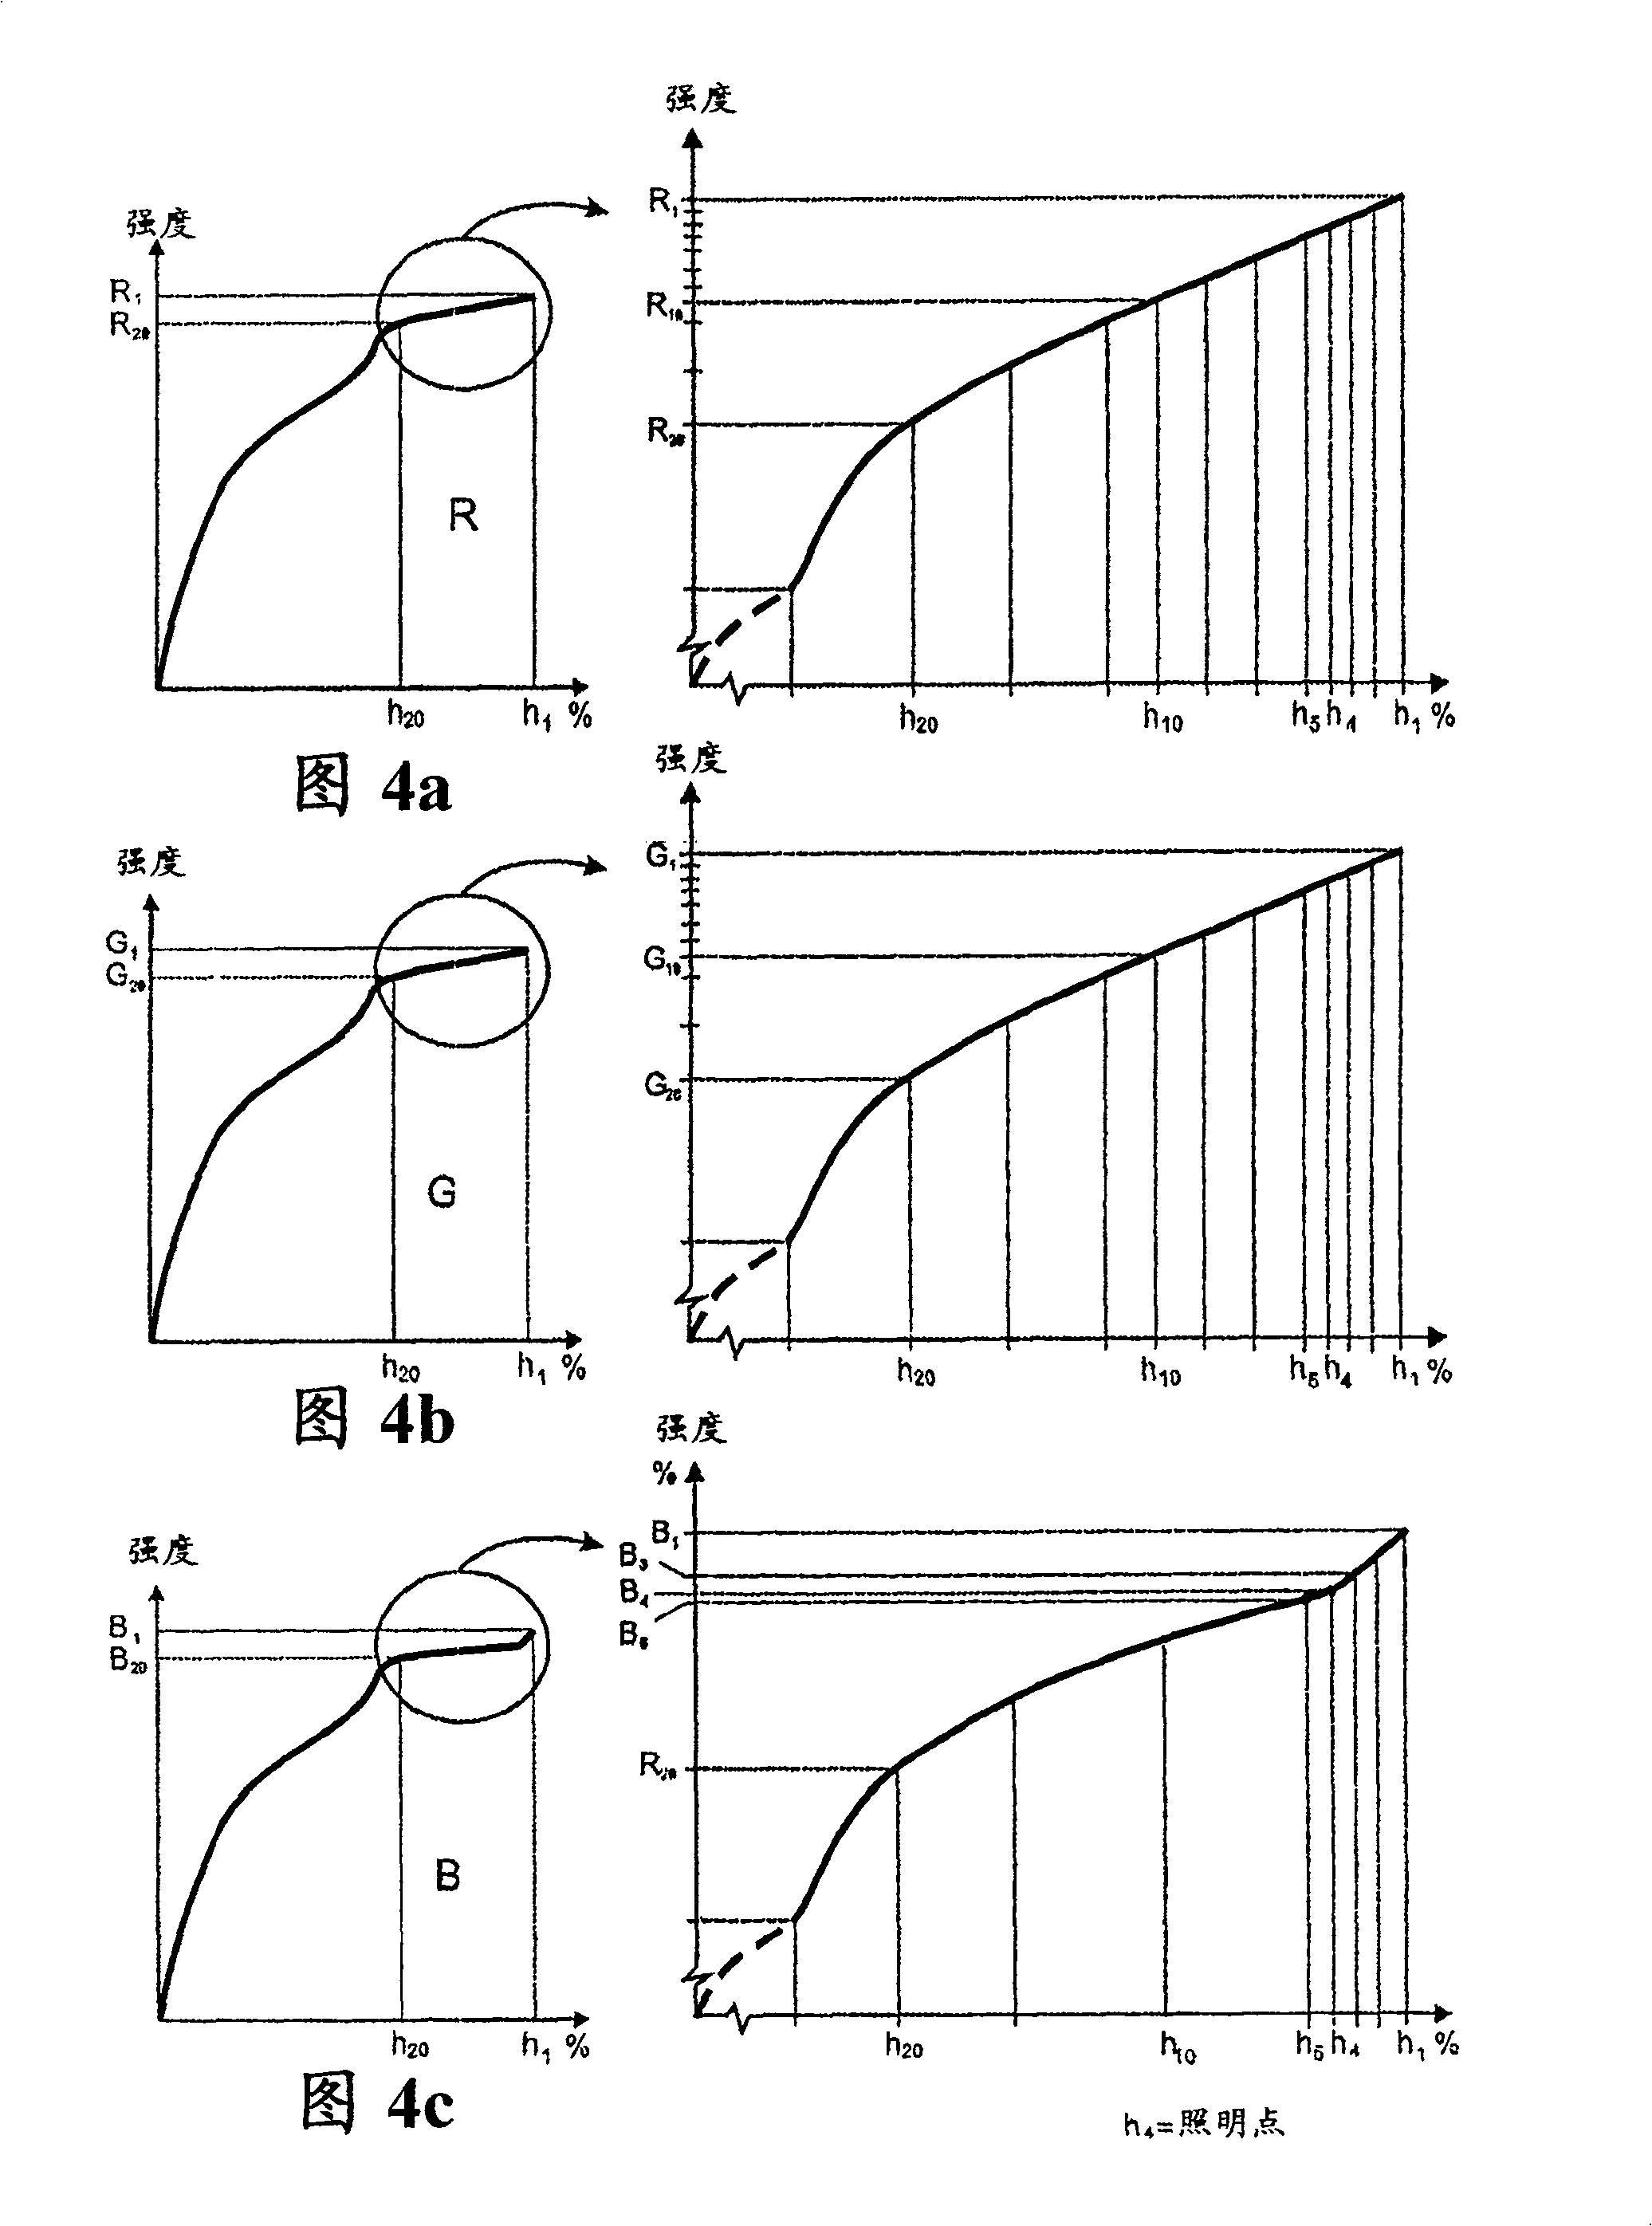 Method and system in a digital image processing chain for adjusting a colour balance, corresponding equipment, and software means for implementing the method